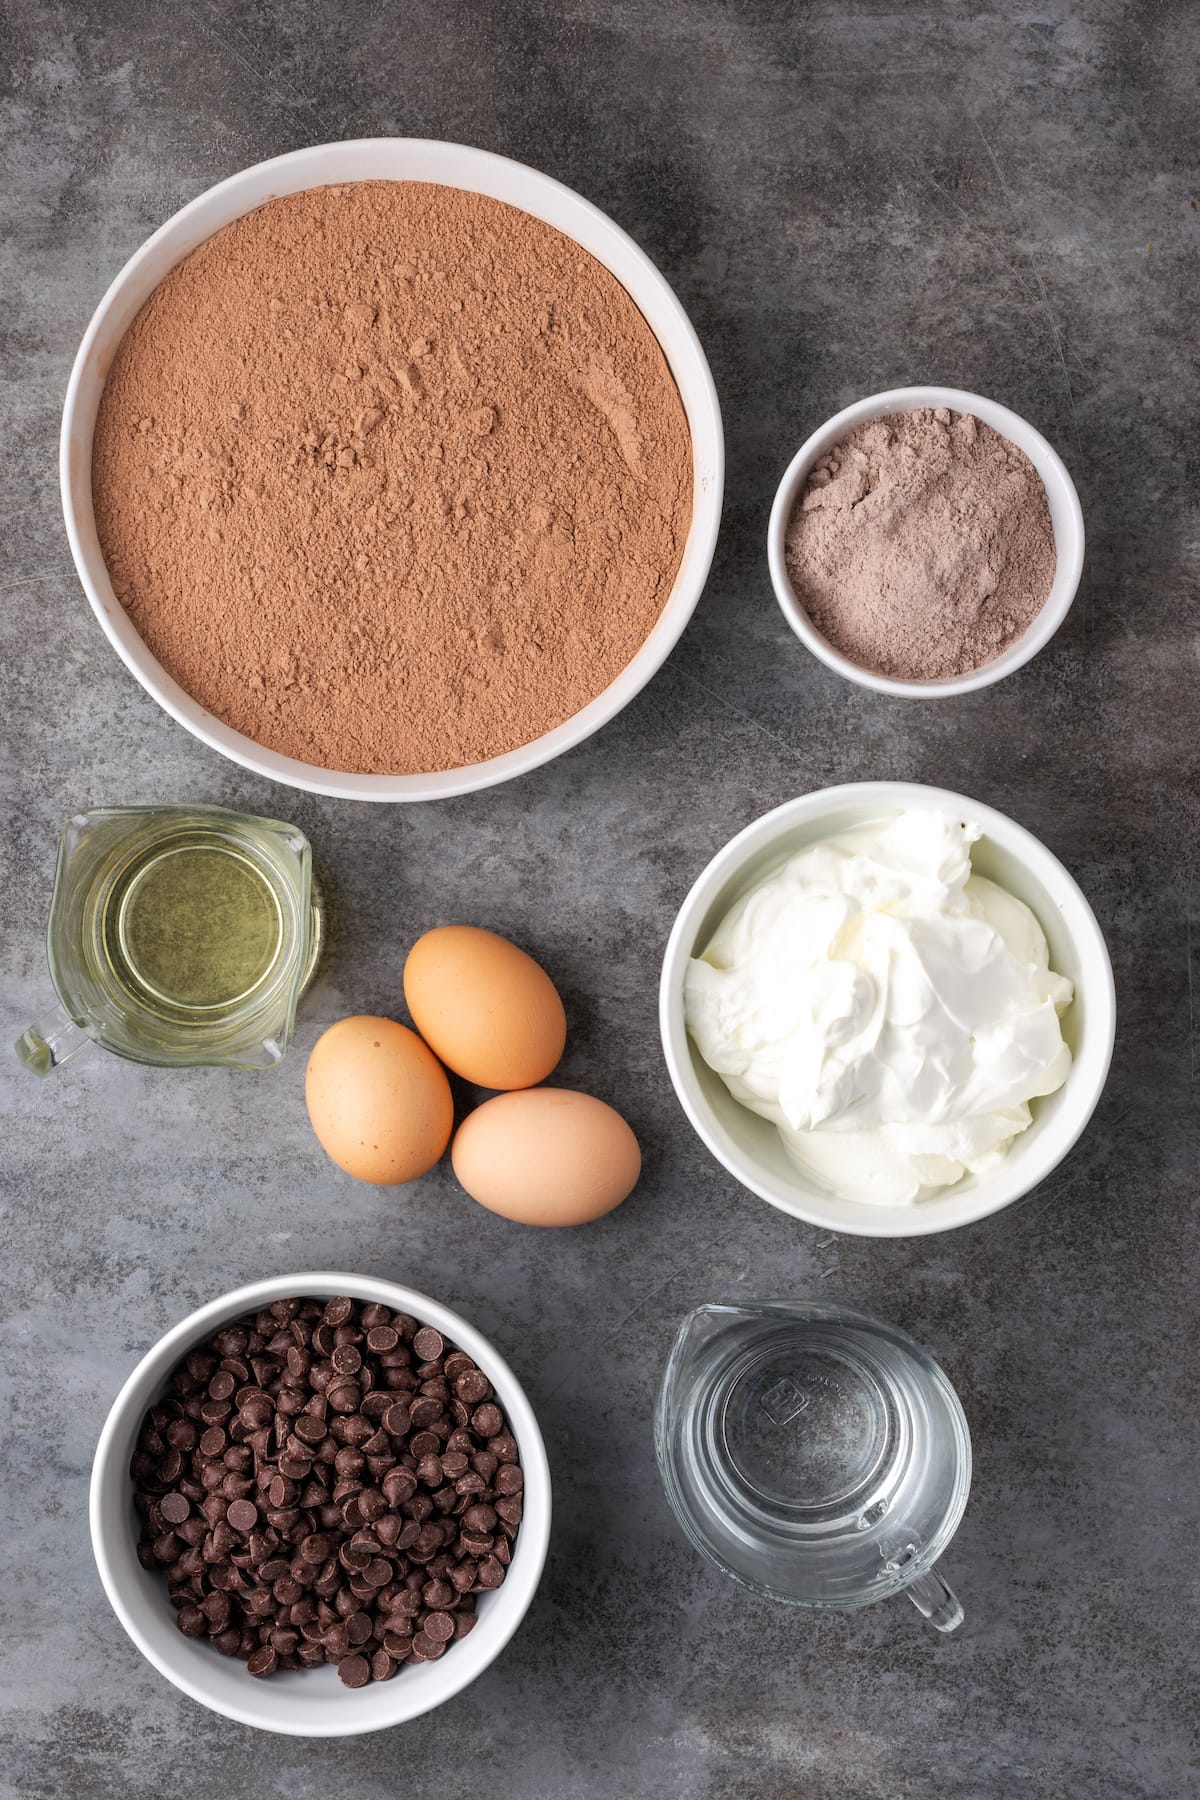 The ingredients for ridiculous chocolate cake.